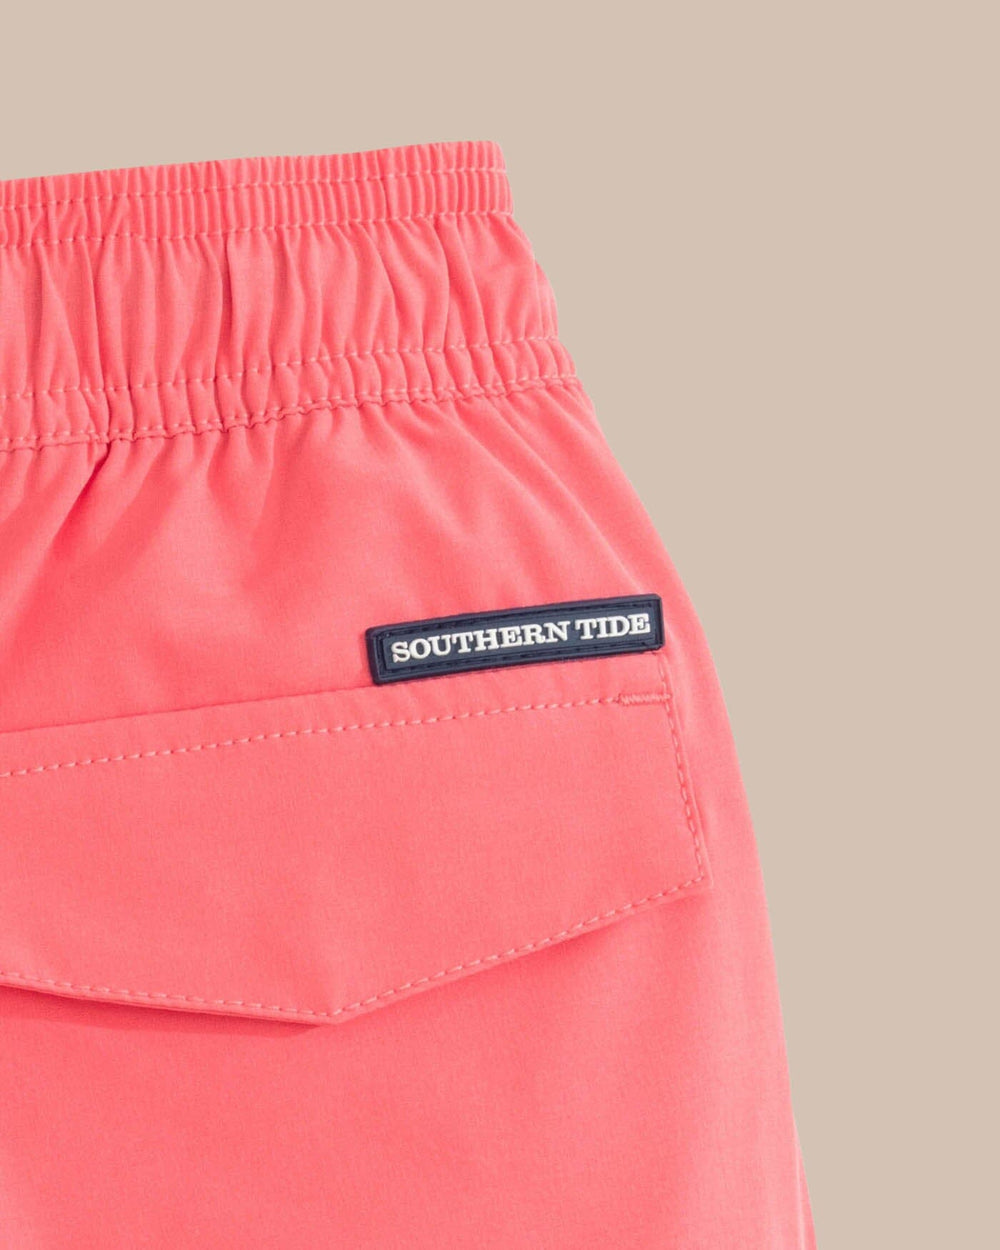 The detail view of the Southern Tide Boys Solid Swim Truck 2 0 by Southern Tide - Sunkist Coral